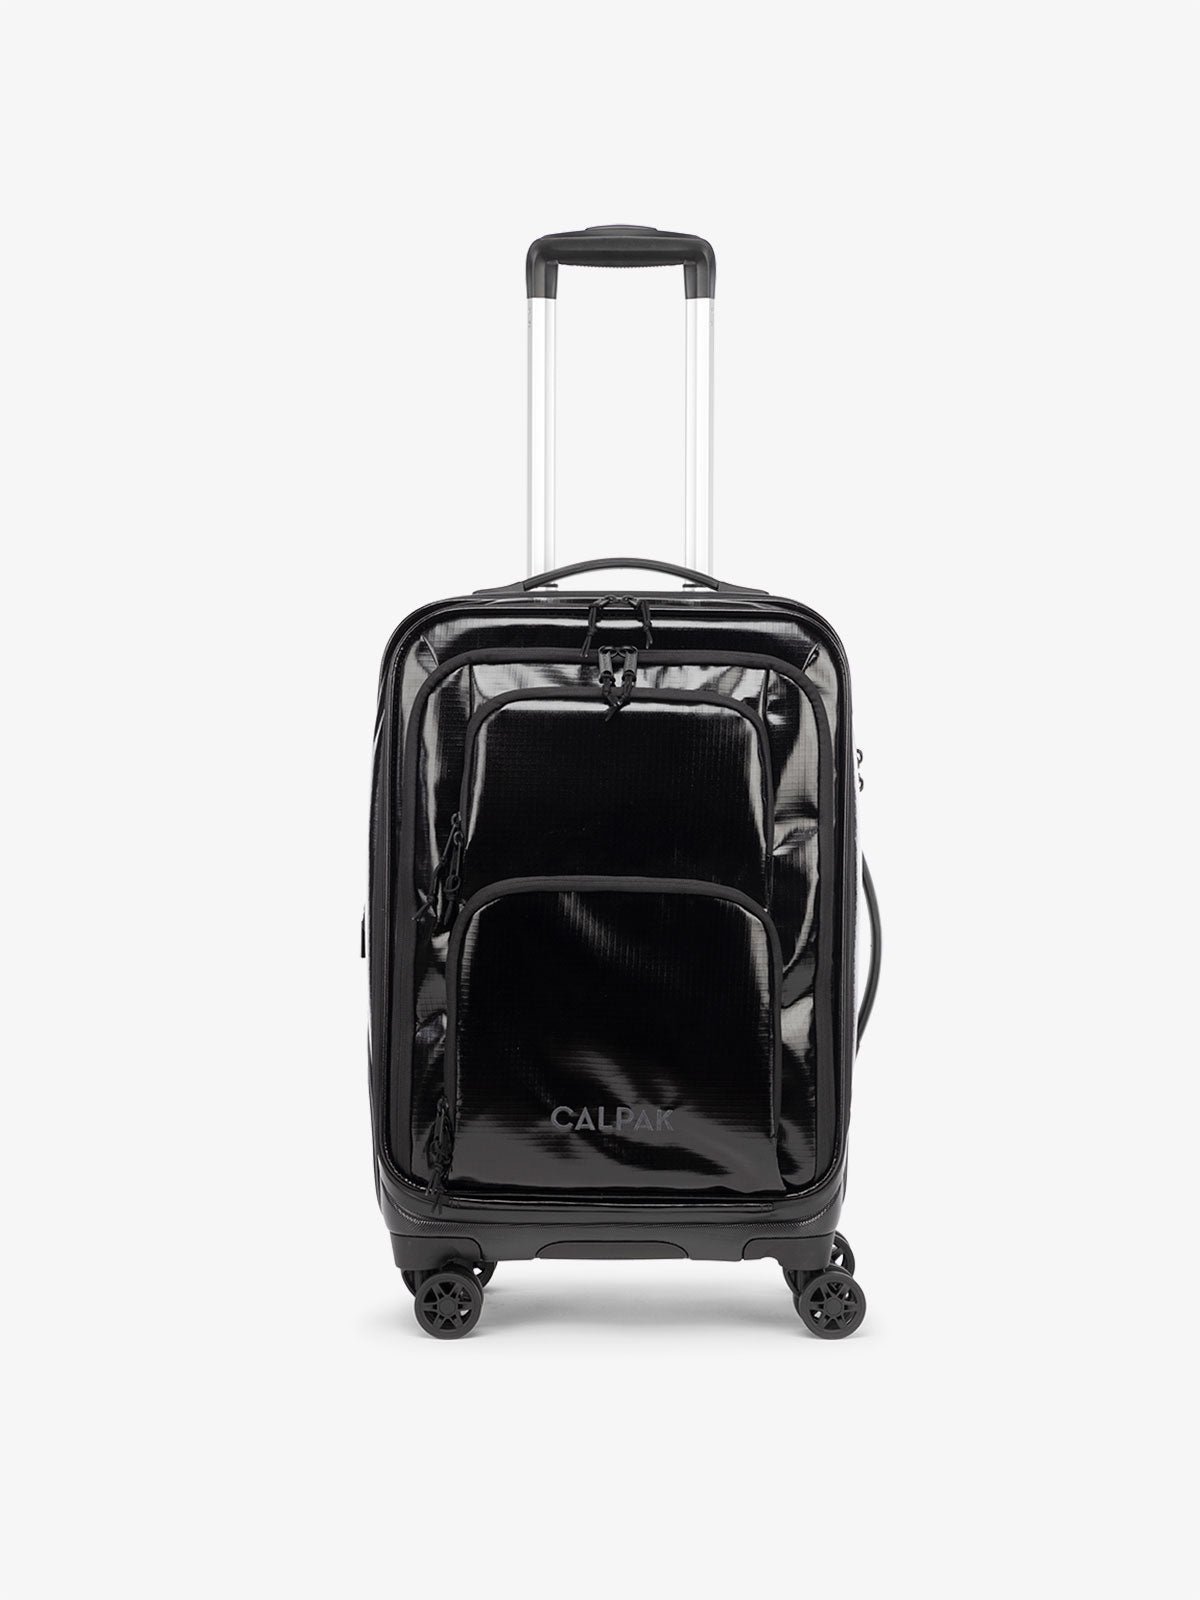 CALPAK Terra Carry-On Luggage soft shell view with 360 spinner wheels in obsidian